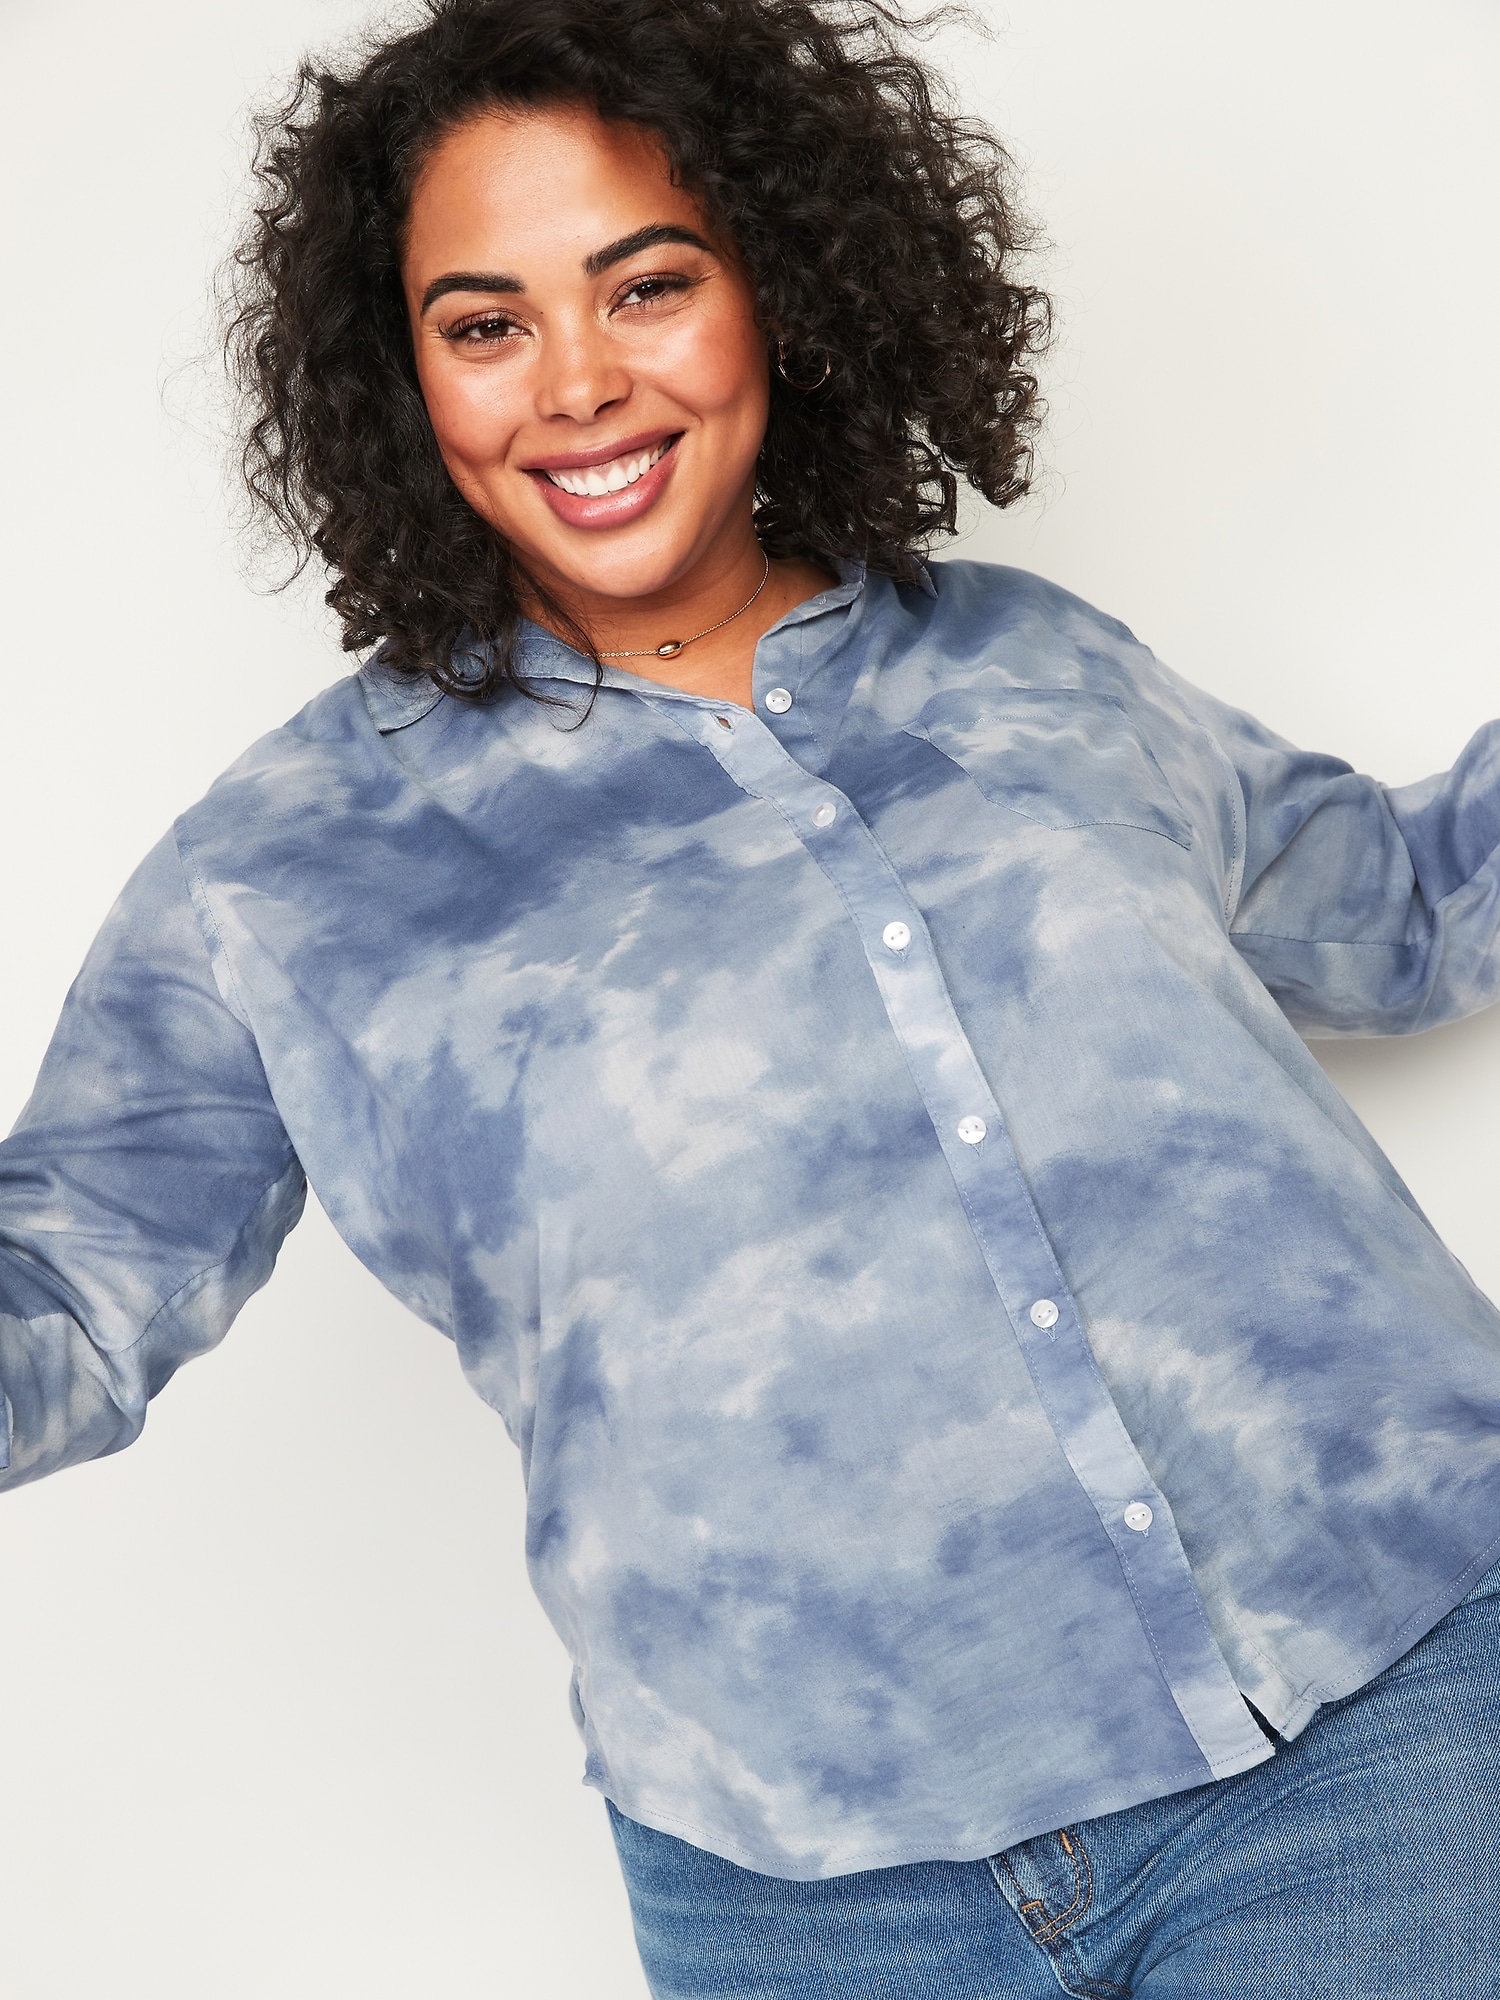 Plus Size Tops in Womens Plus